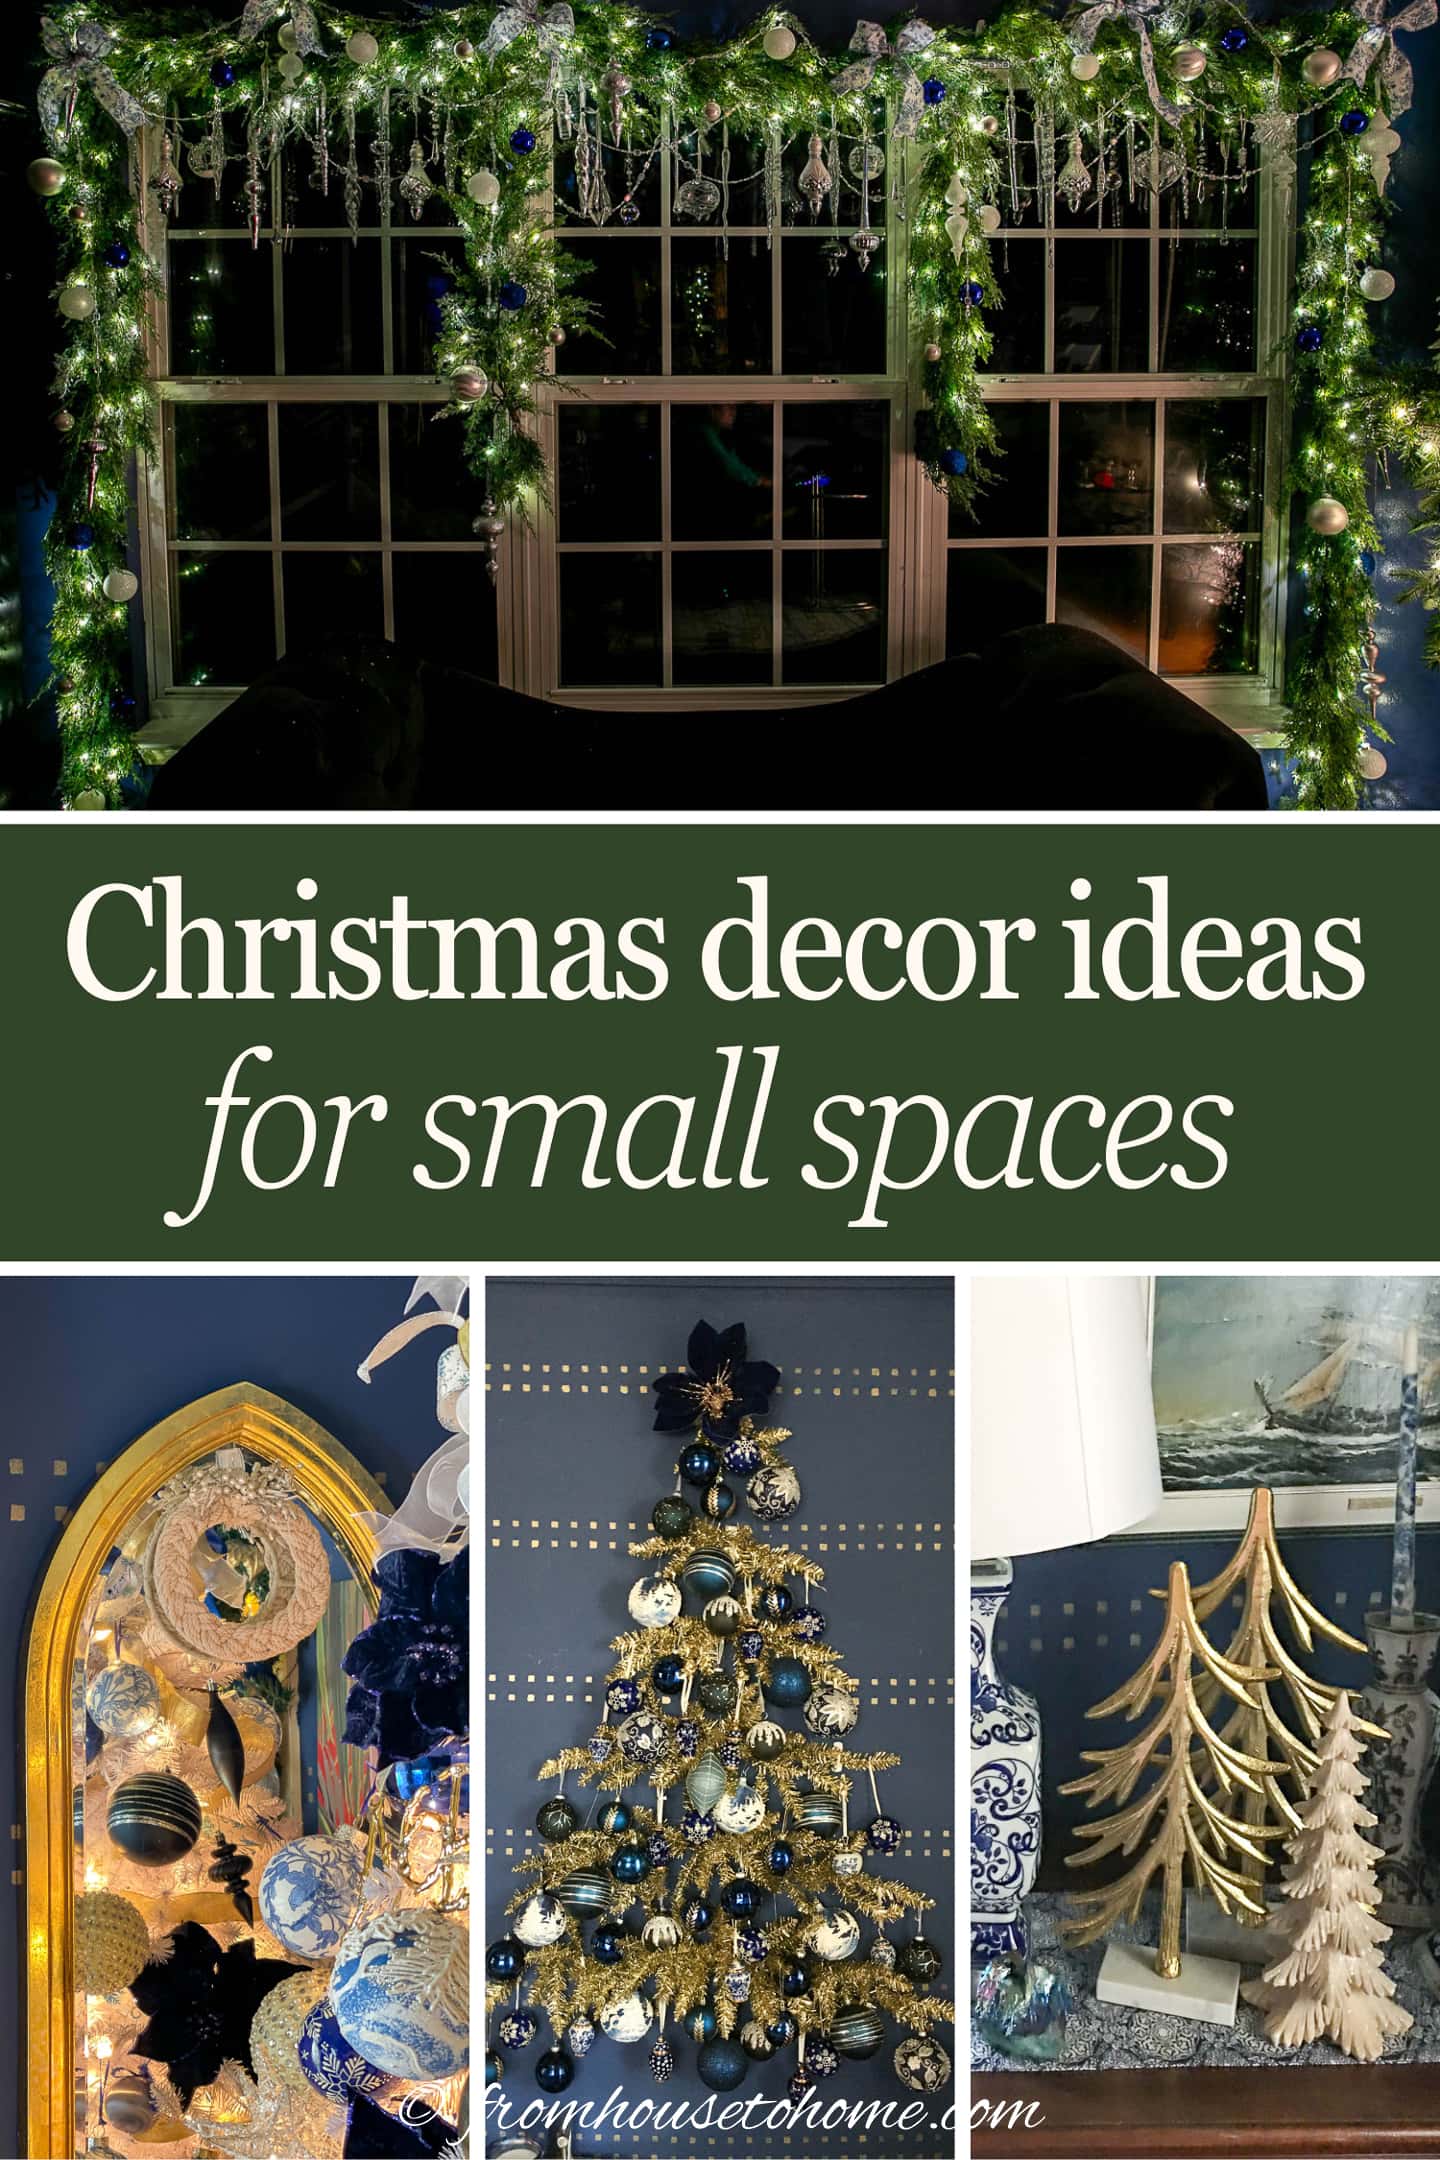 Christmas decor ideas for small spaces